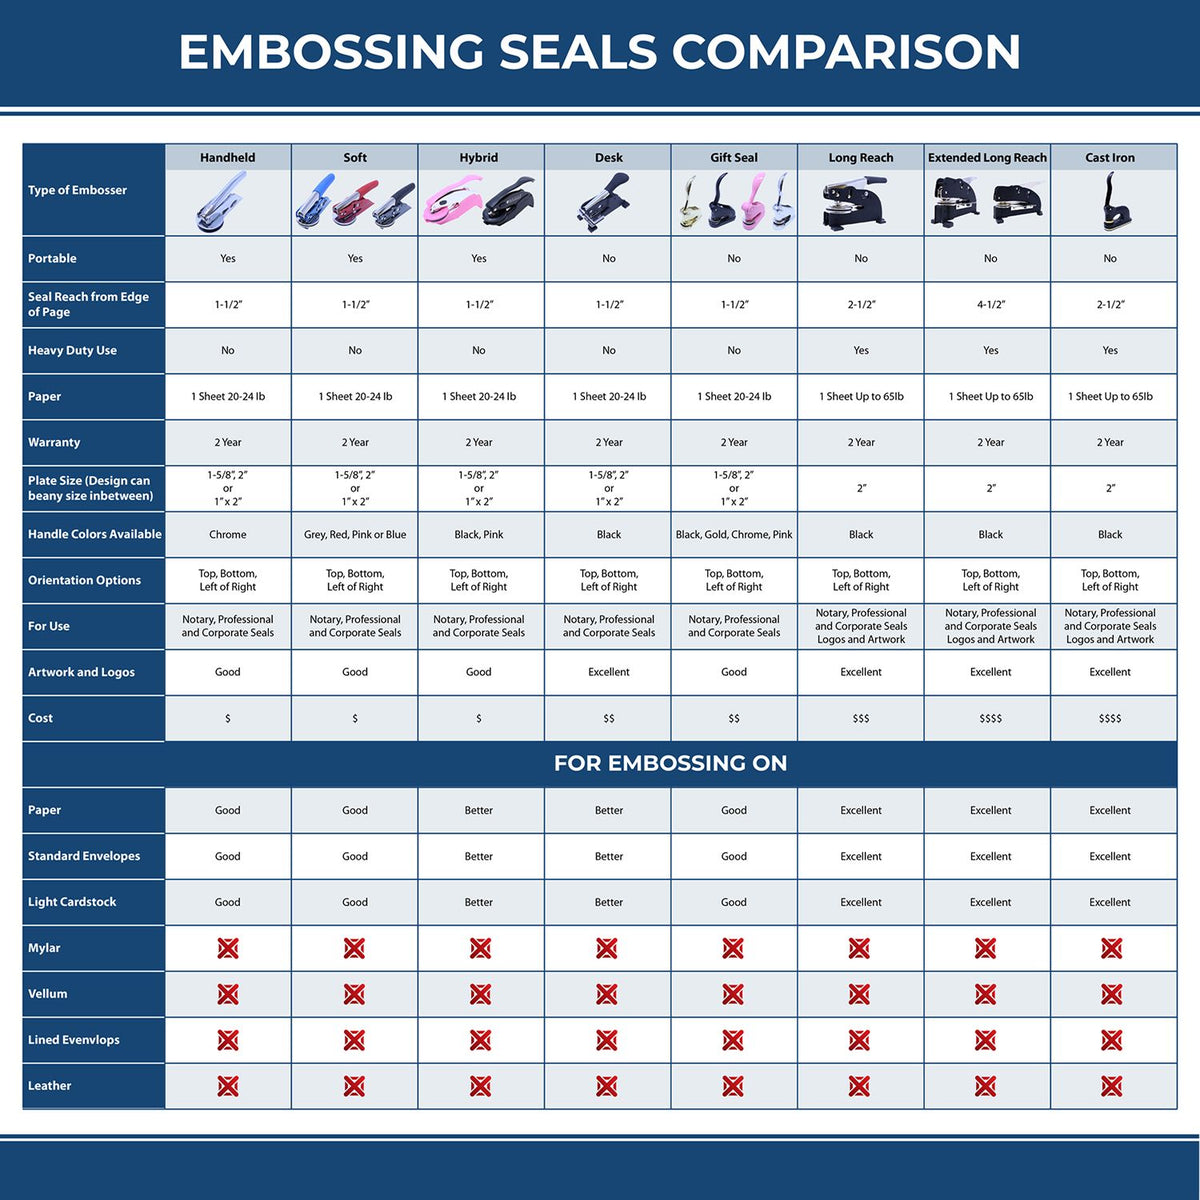 A comparison chart for the different types of mount models available for the Heavy Duty Cast Iron South Dakota Engineer Seal Embosser.